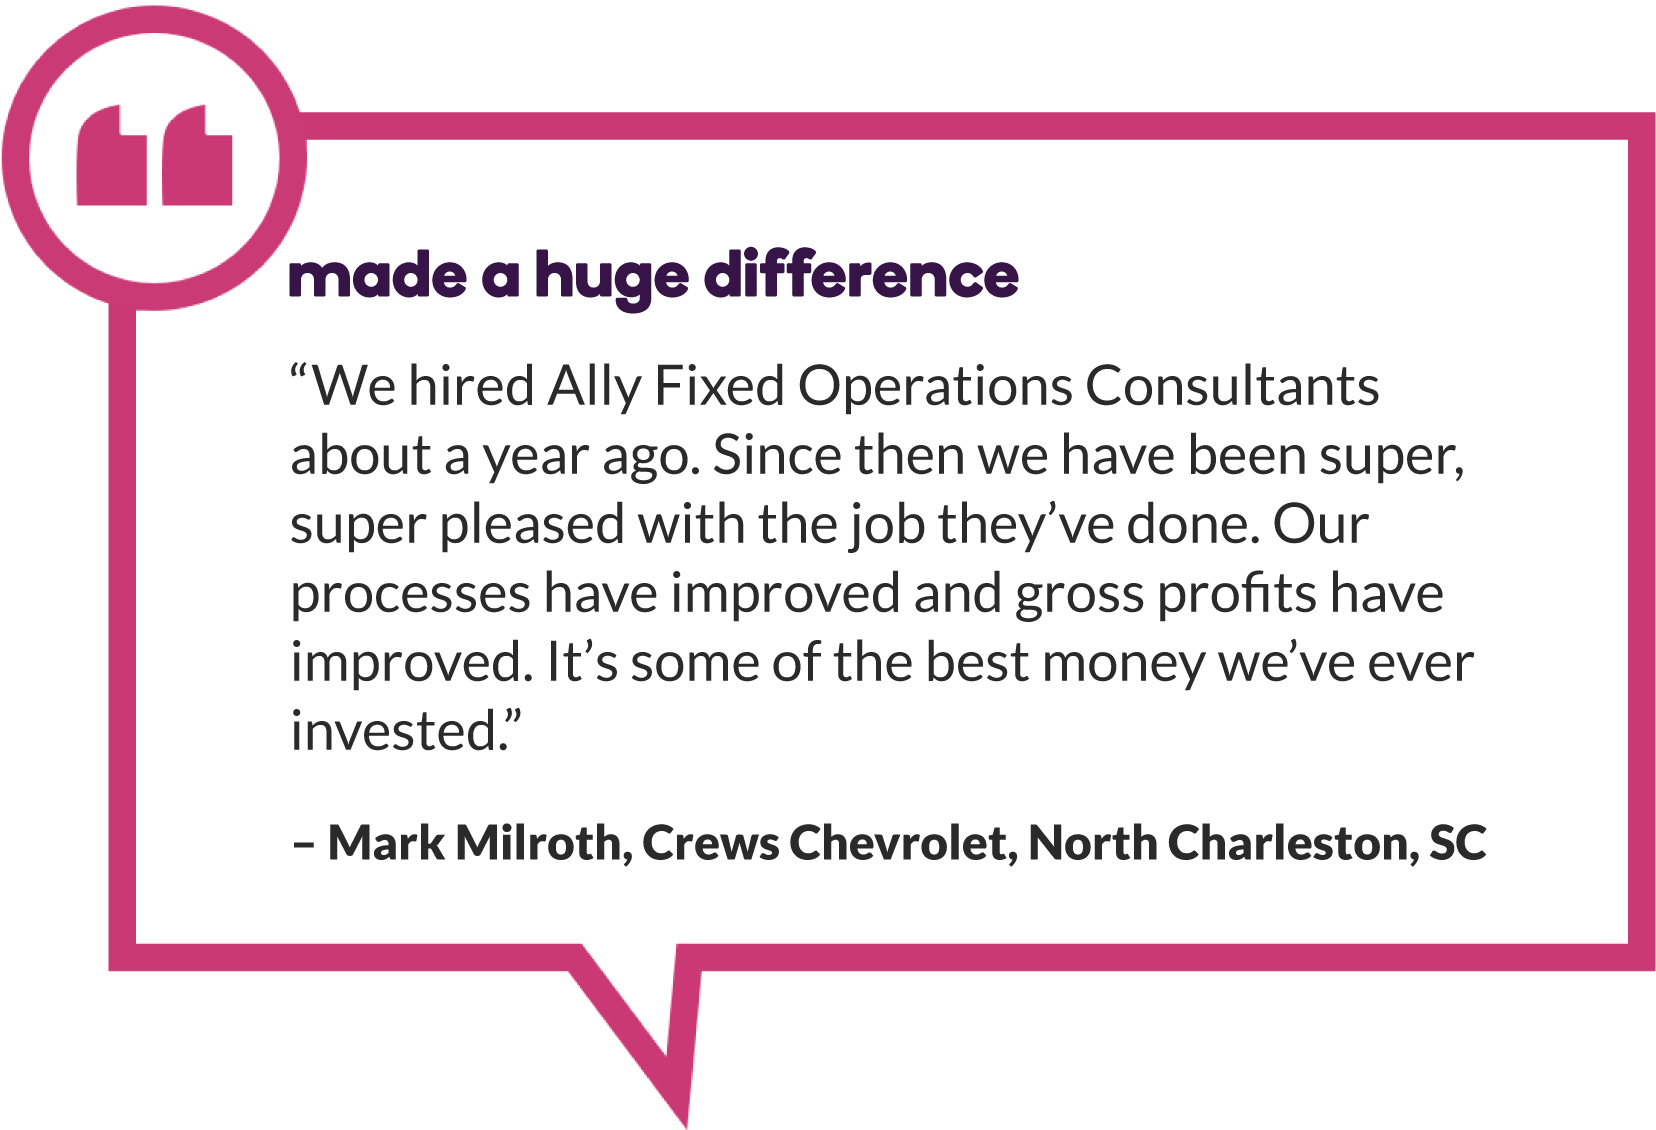 Mark Milroth of Crews Chevrolet in North Charleston, SC says, “We hired Ally Fixed Operations Consultants about a year ago. Since then we have been super, super pleased with the job they’ve done. Our processes have improved and gross profits have improved. It’s some of the best money we’ve ever invested.”